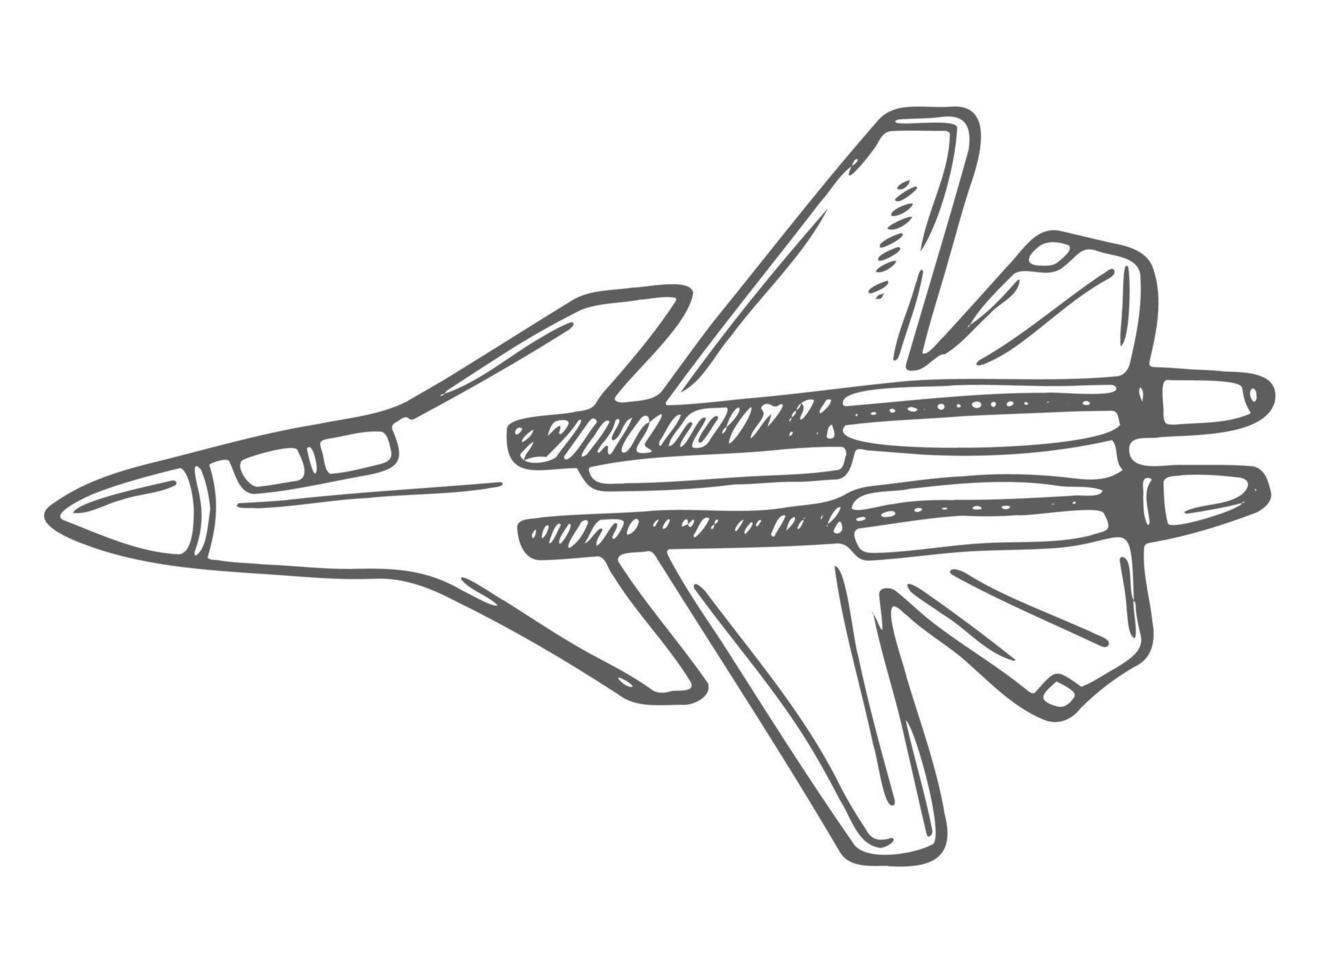 Military fighter jet doodle sketch. Army plane icon in vector